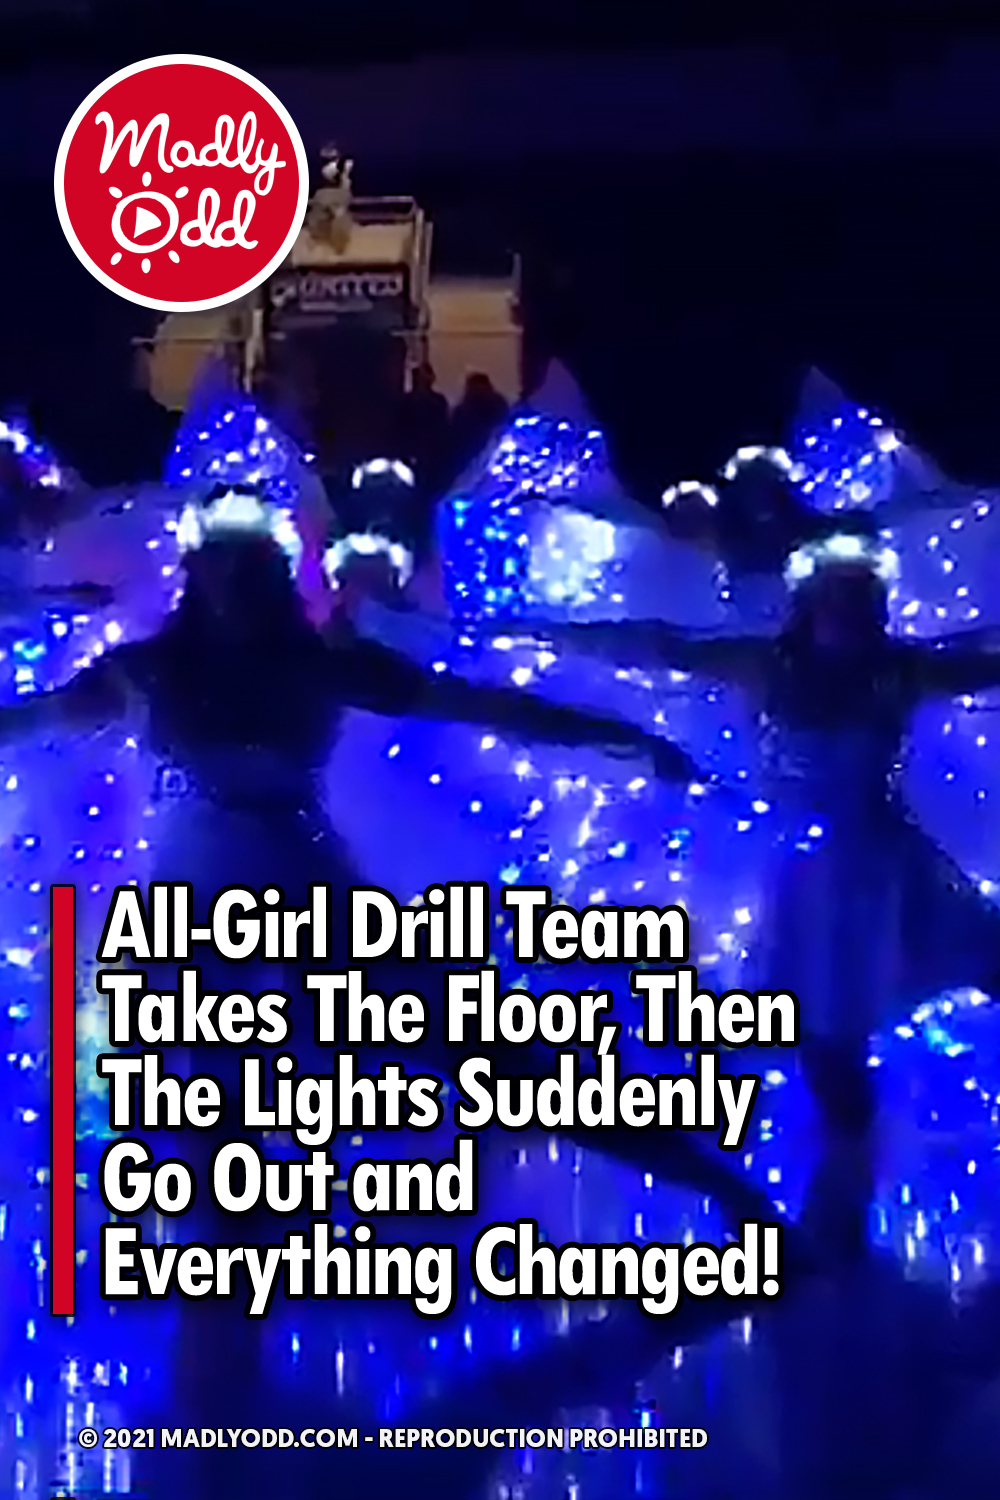 All-Girl Drill Team Takes The Floor, Then The Lights Suddenly Go Out and Everything Changed!